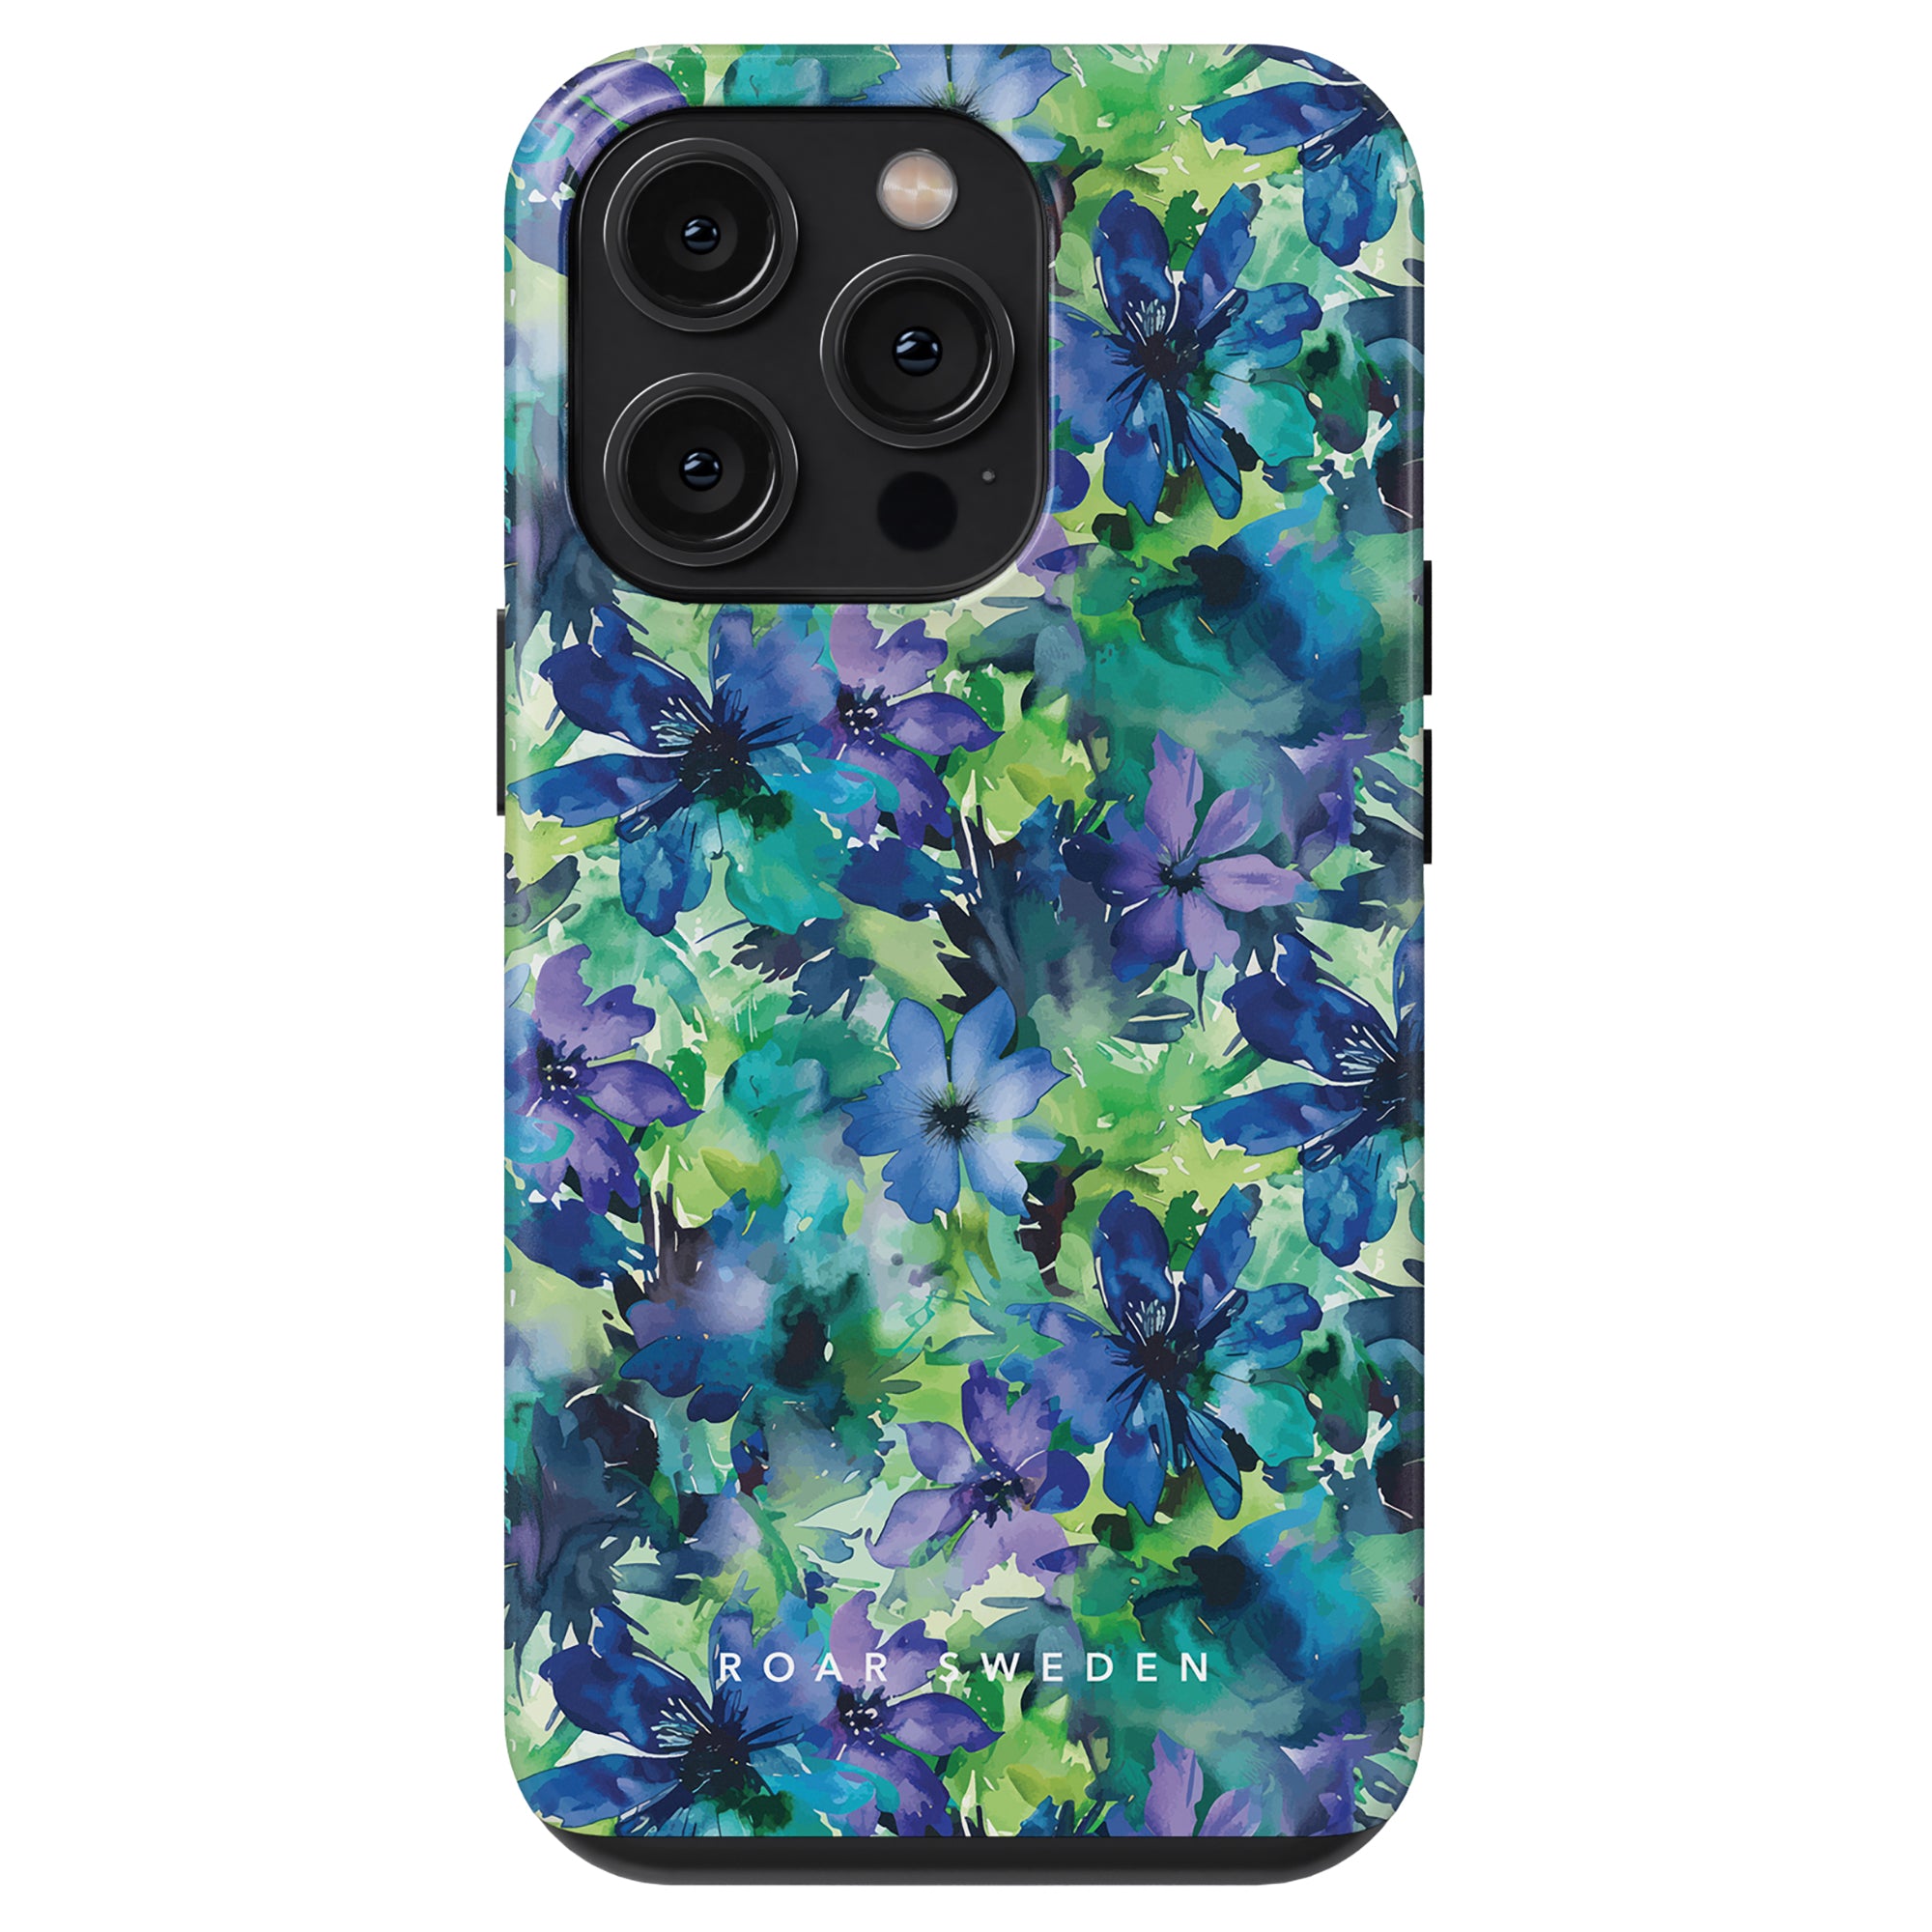 Smartphone with a floral-patterned case from the Sweet Flower - Tough Case, featuring shades of blue, green, and purple flowers. The camera module has three lenses, and the tough case has the text "Roar Weden" near the bottom.